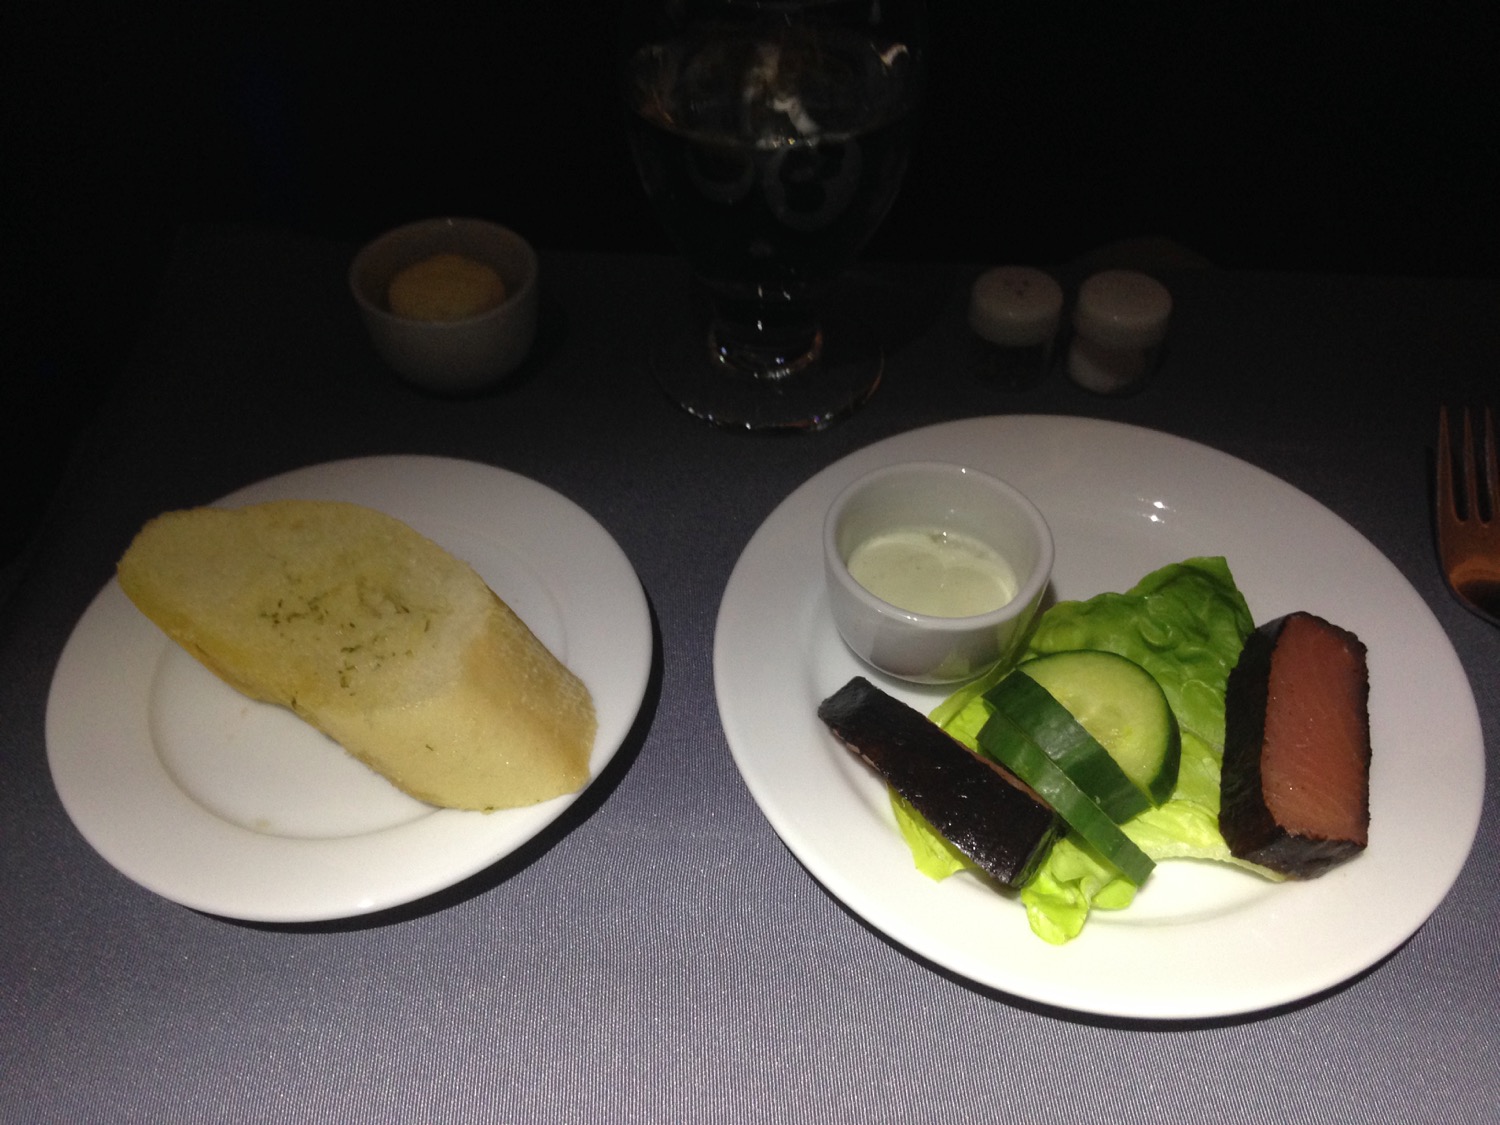 United Houston to Lagos Business Class - 16